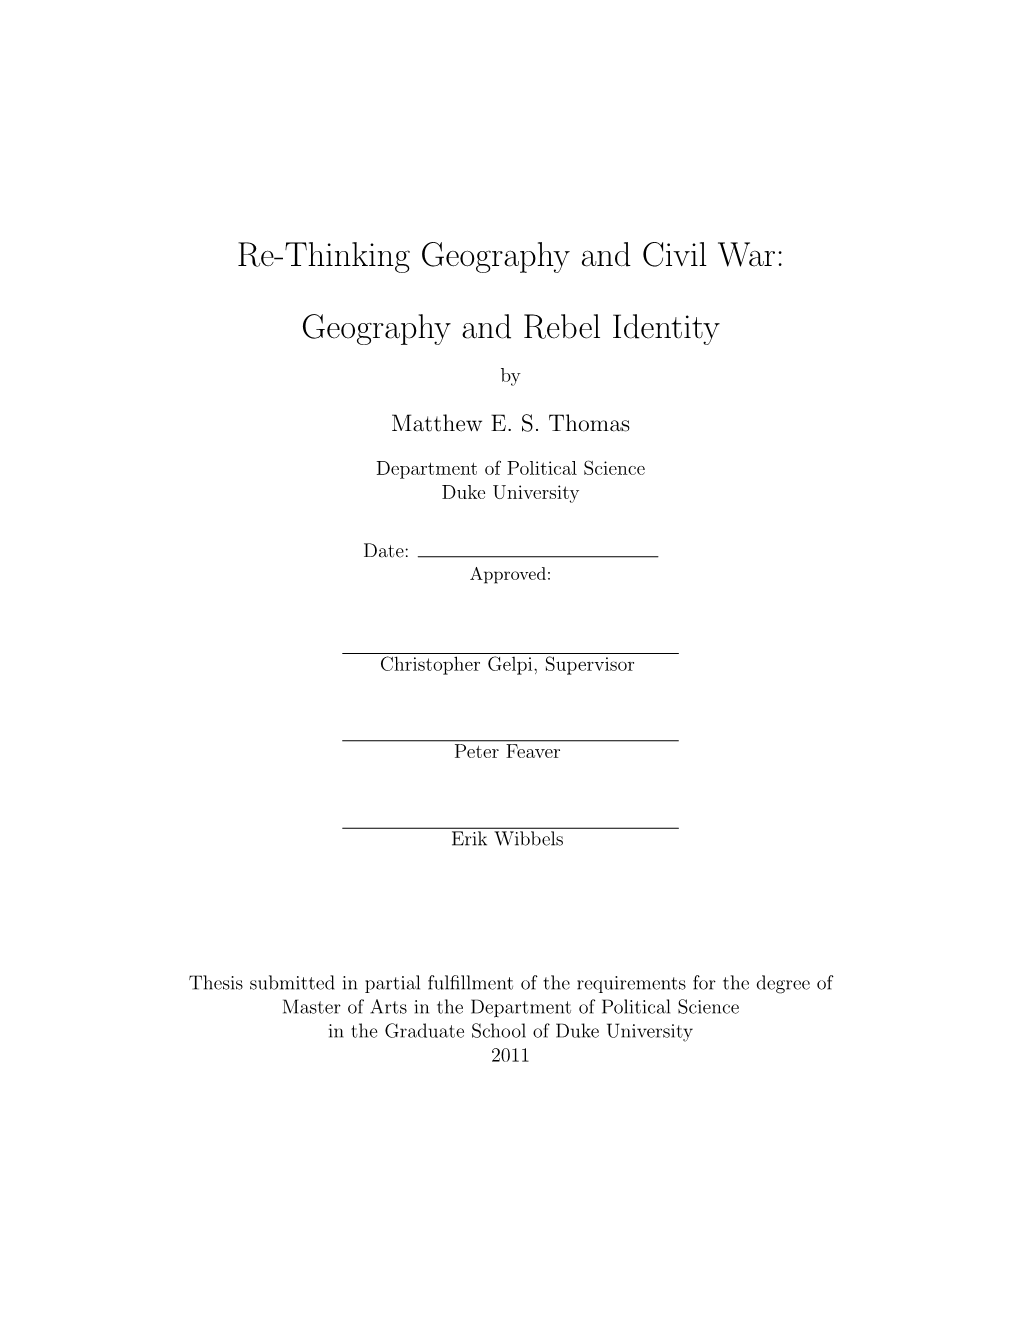 Re-Thinking Geography and Civil War